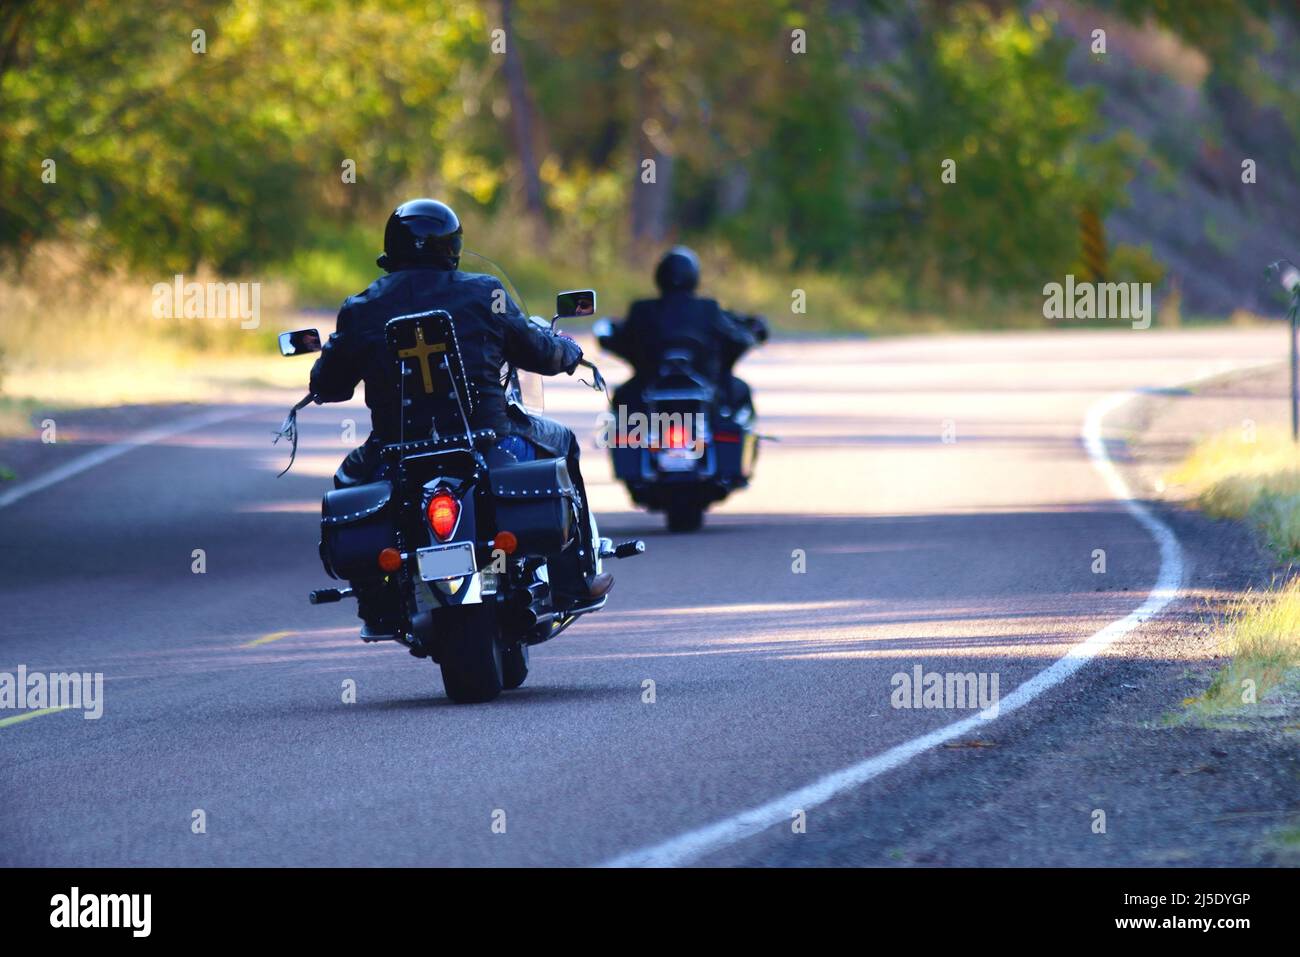 Motorcyclists on a sunny day outing.on a road that curves beside hills with trees. Stock Photo